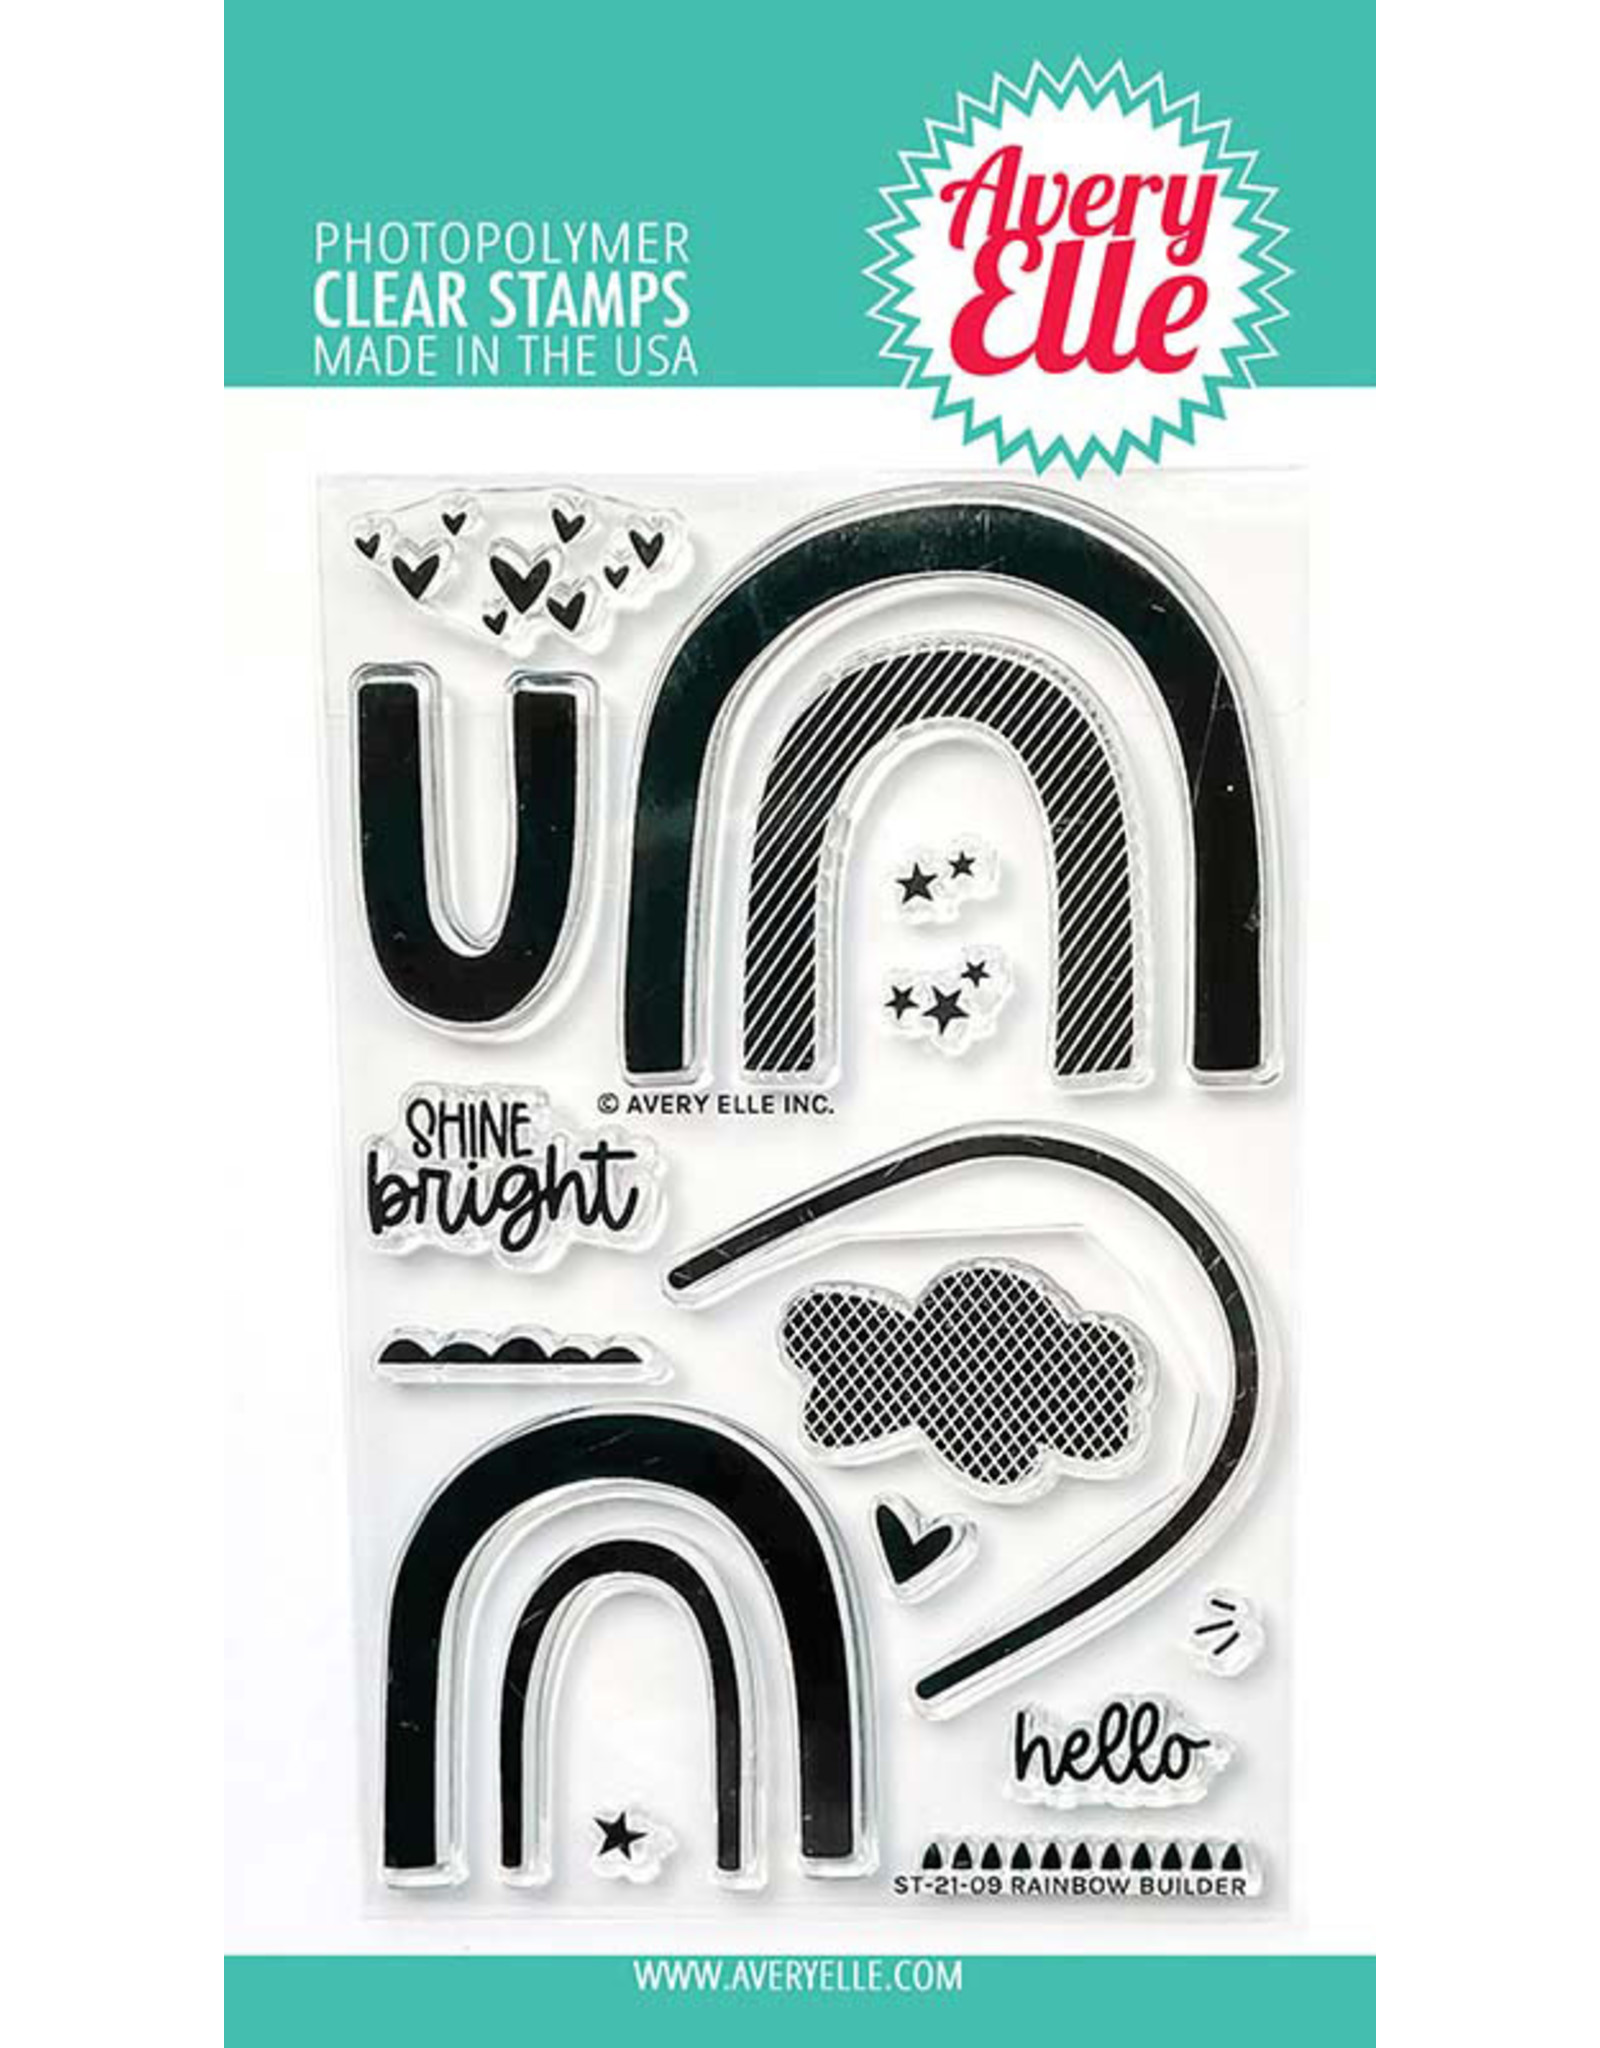 Avery Elle Rainbow Builder Clear Stamps